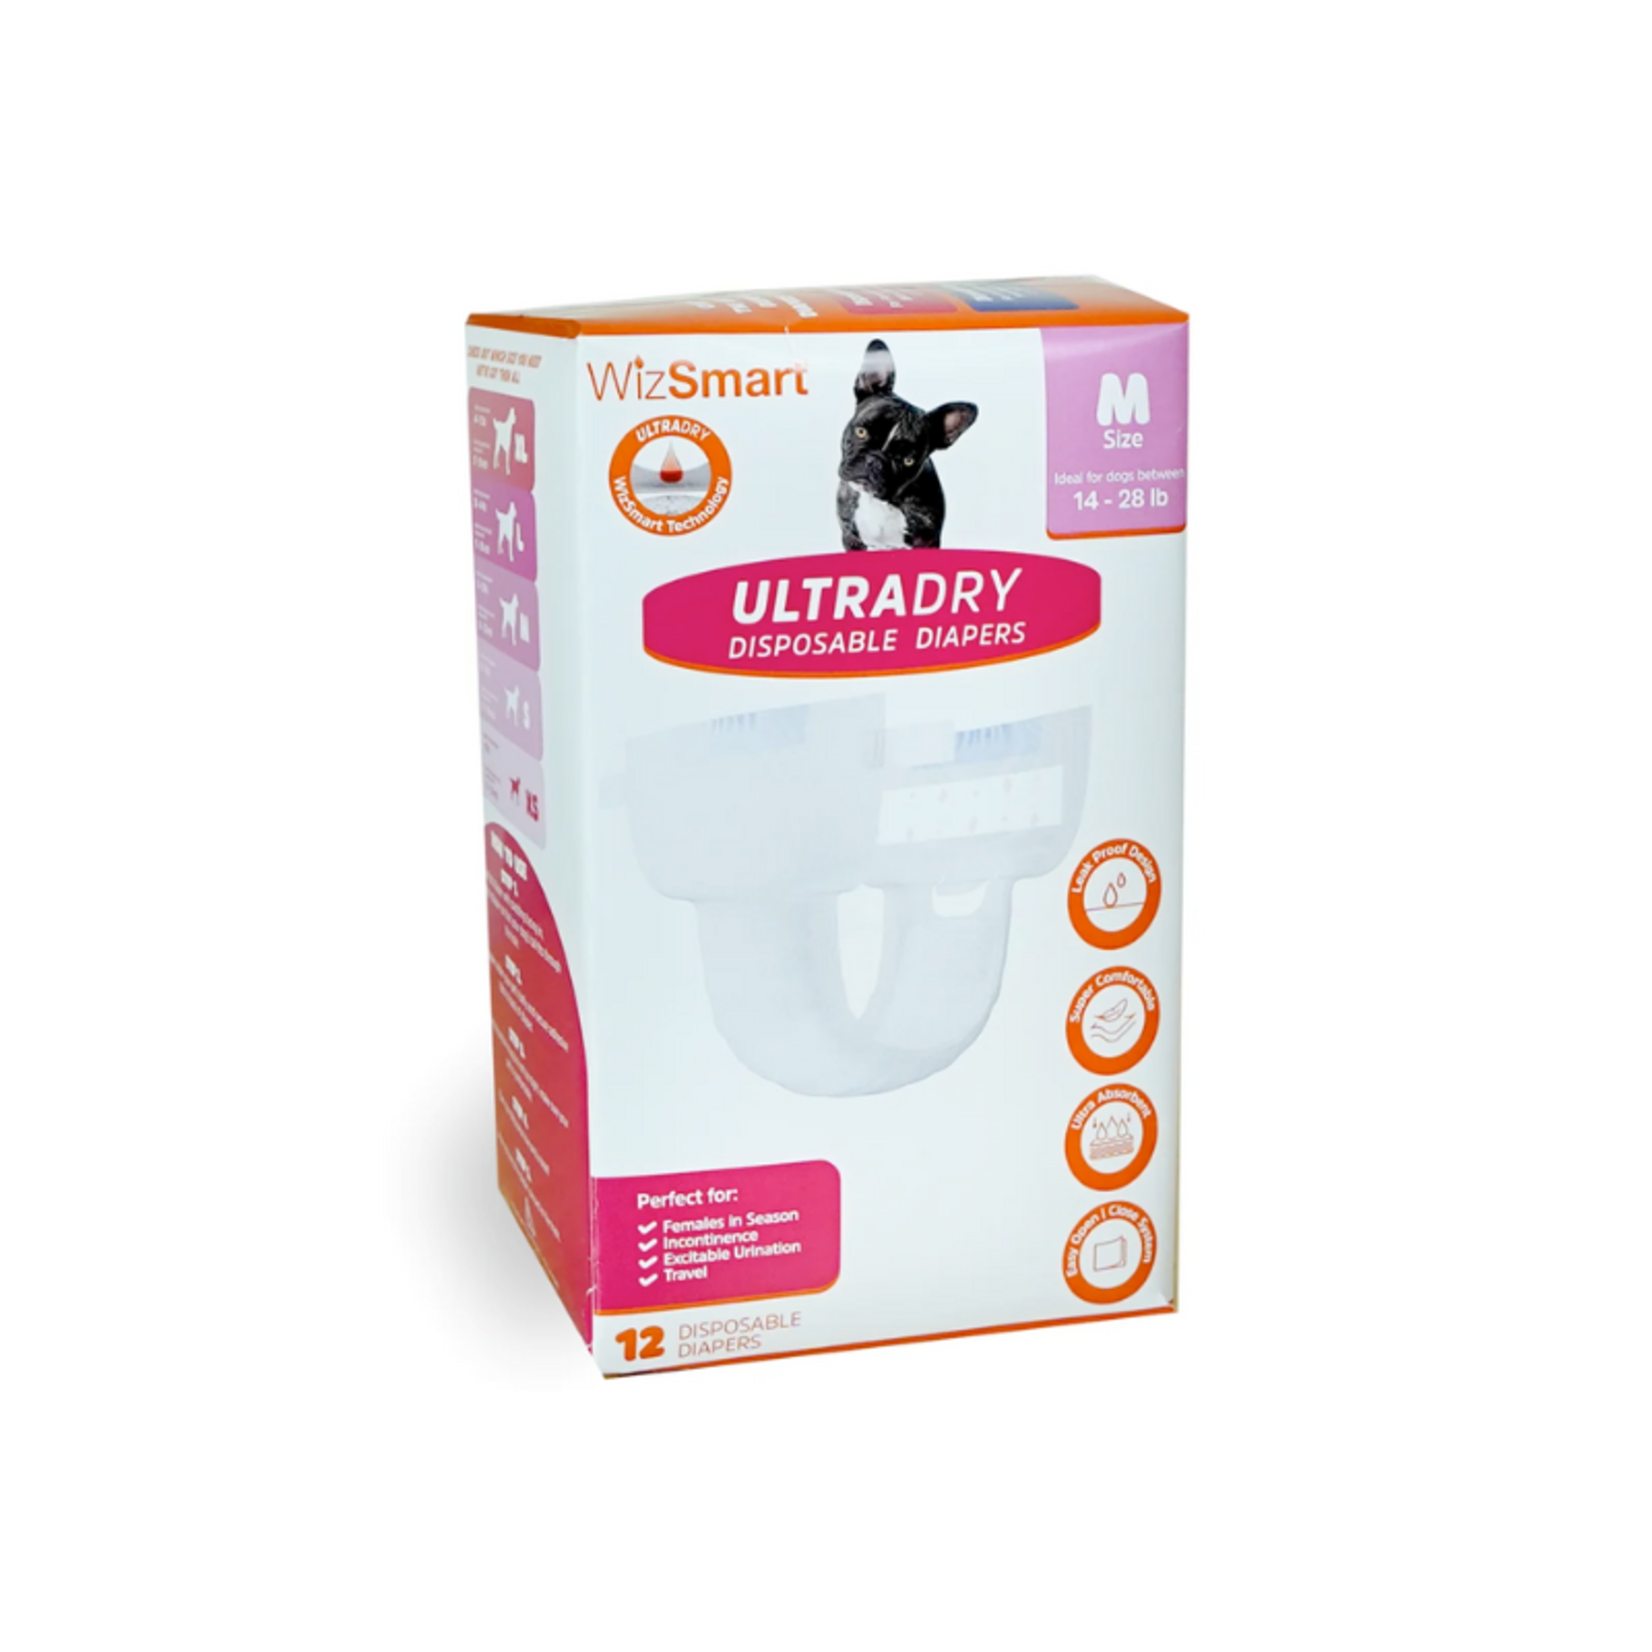 12 pack - UltraDry Disposable Dog Diapers - WizSmart